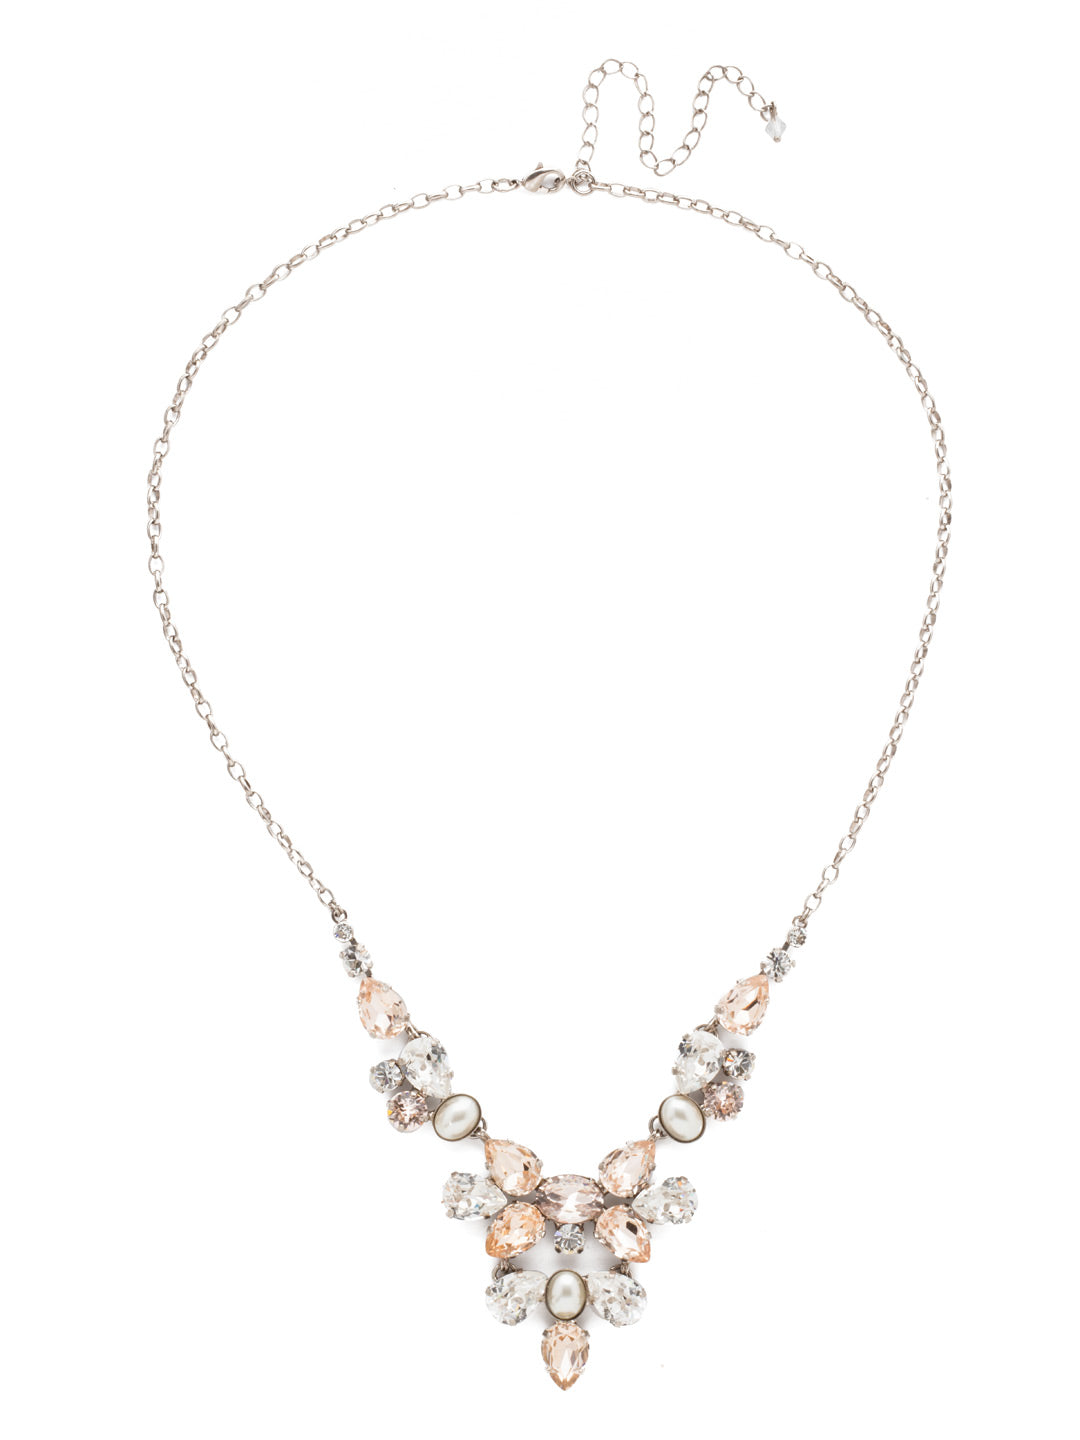 Chambray Statement Necklace - NDE59ASPLS - <p>Our Chambray Statement Necklace has it all! Semi-precious stones sprinkled throughout clusters of round and pear-shaped crystals makes for an unforgettable bib necklace. From Sorrelli's Soft Petal collection in our Antique Silver-tone finish.</p>